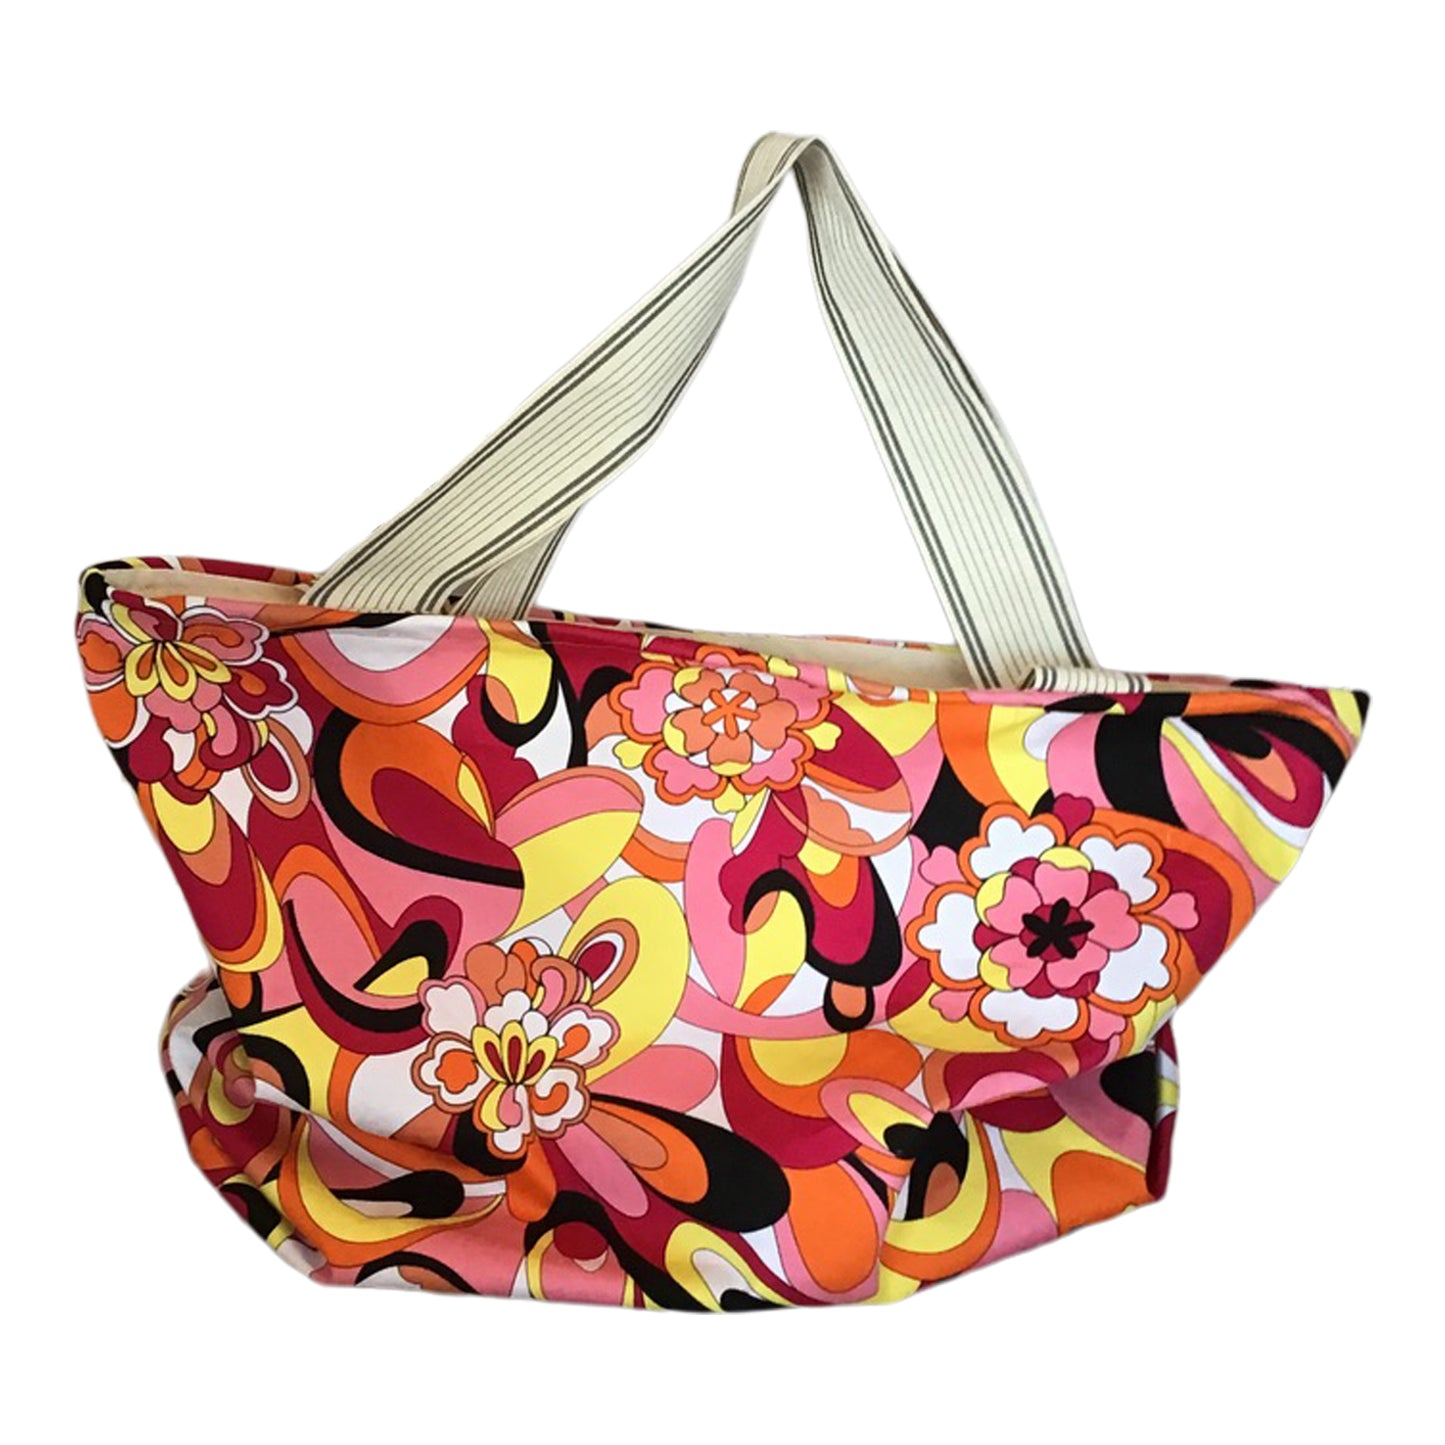 Tote bag in cotton Pucci-inspired print